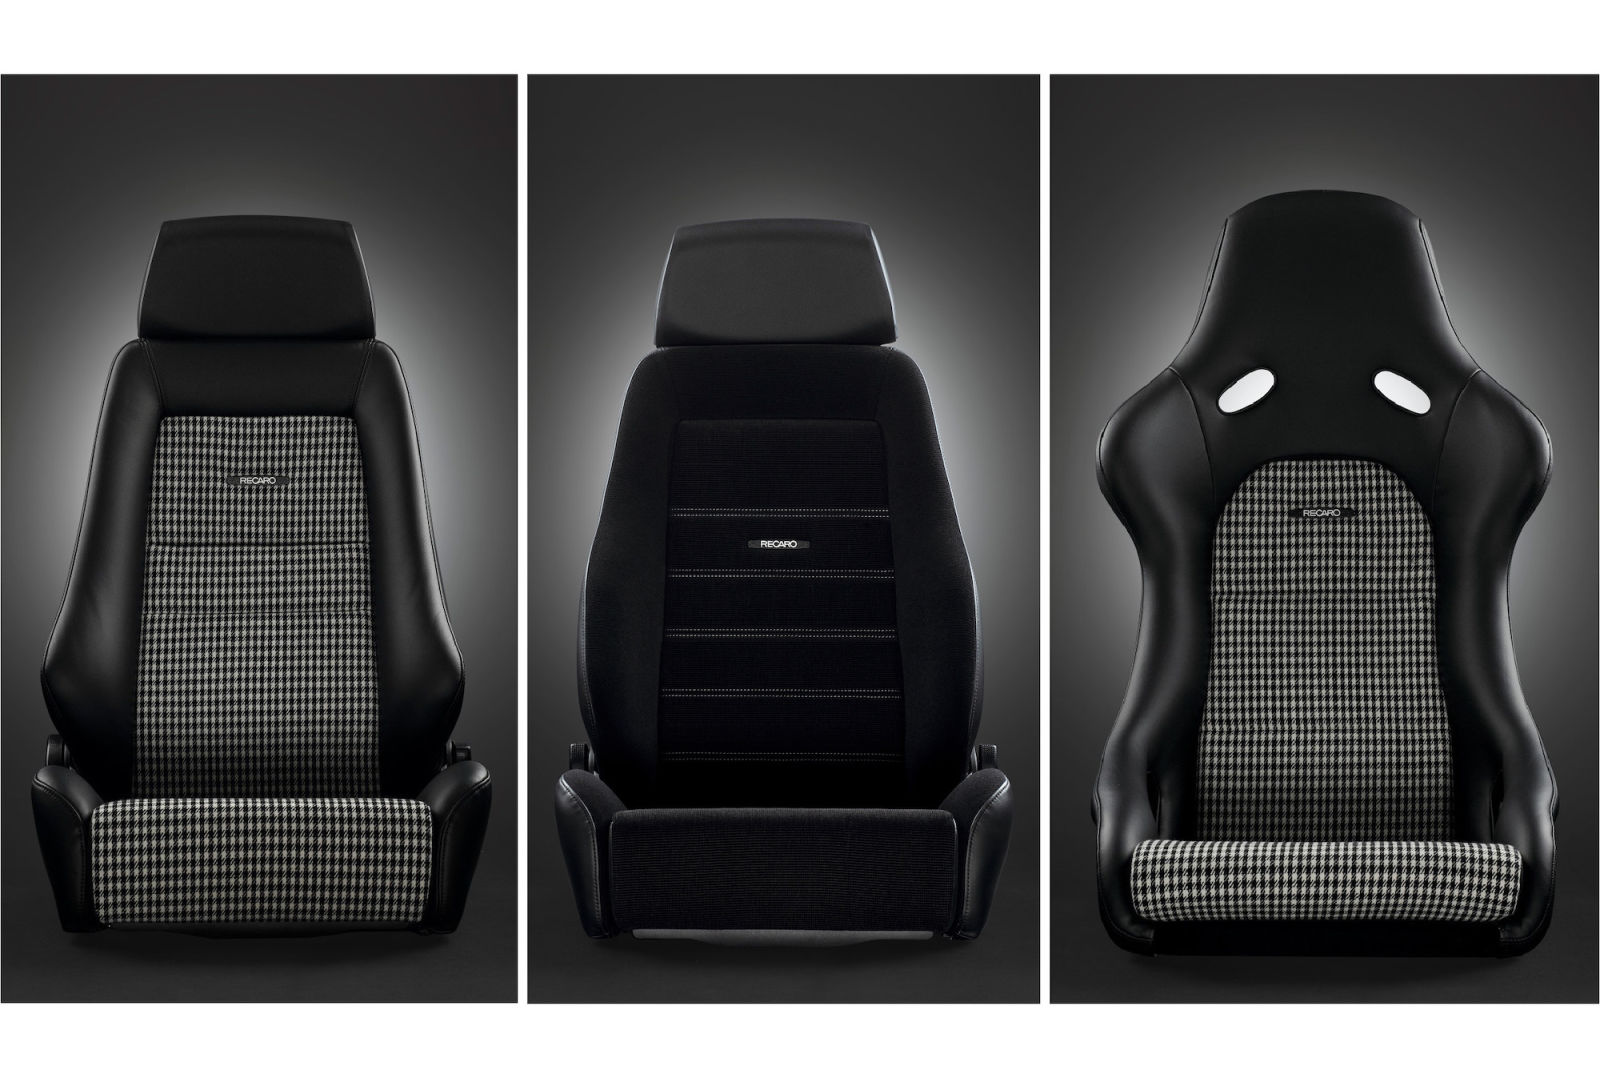 Illustration for article titled Recaro releases a Classic line